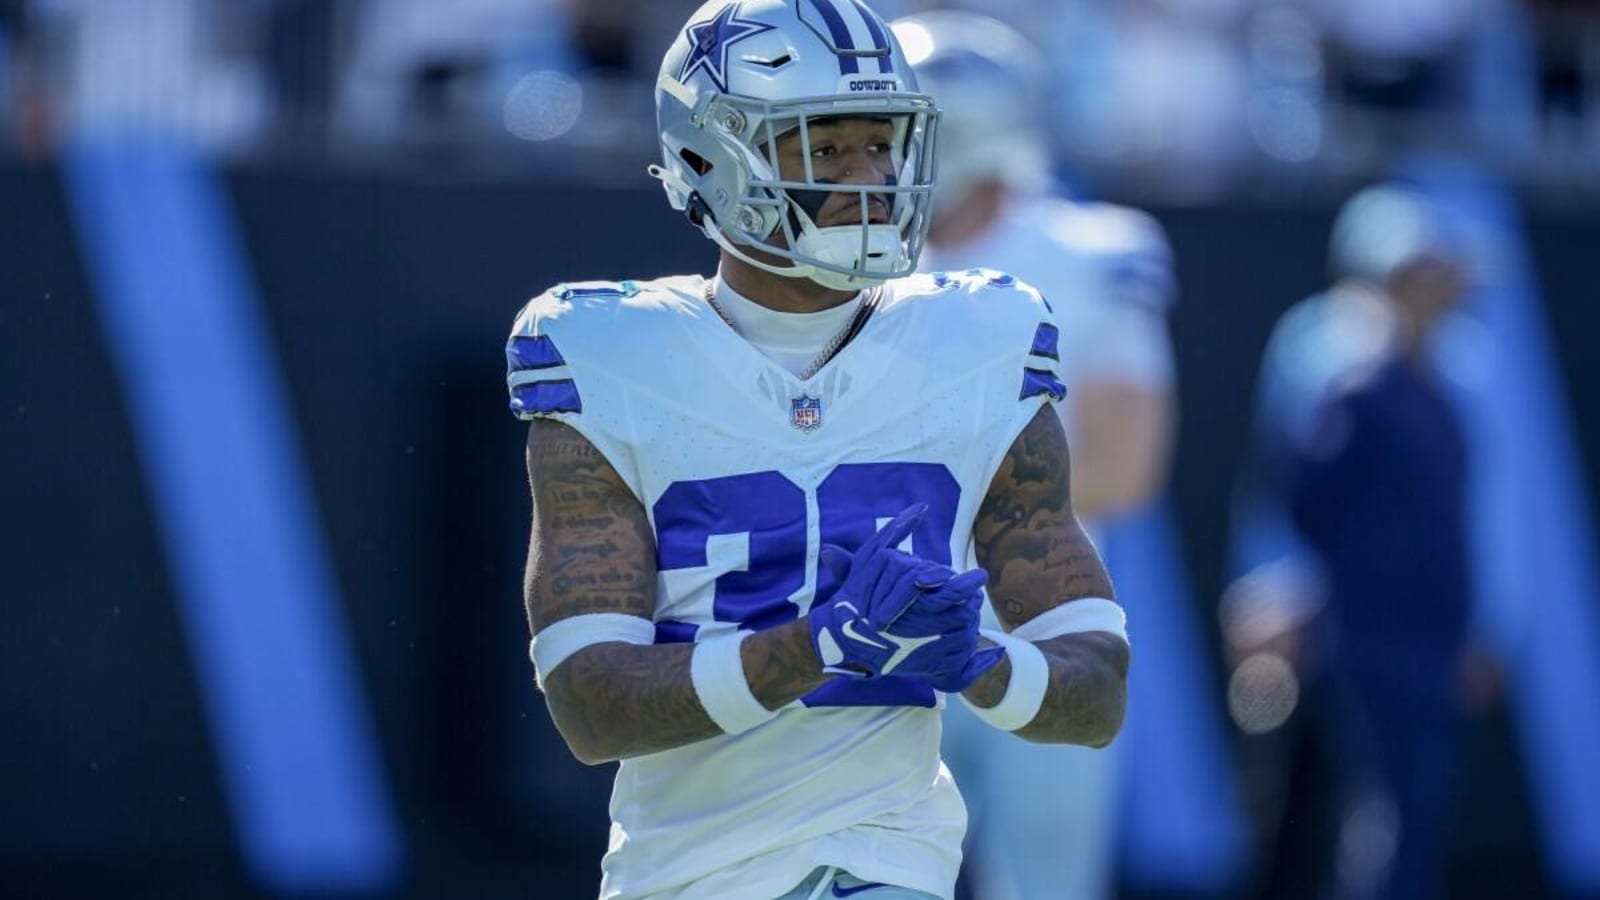 Cowboys: Juanyeh Thomas puts his fans on blast with social media post